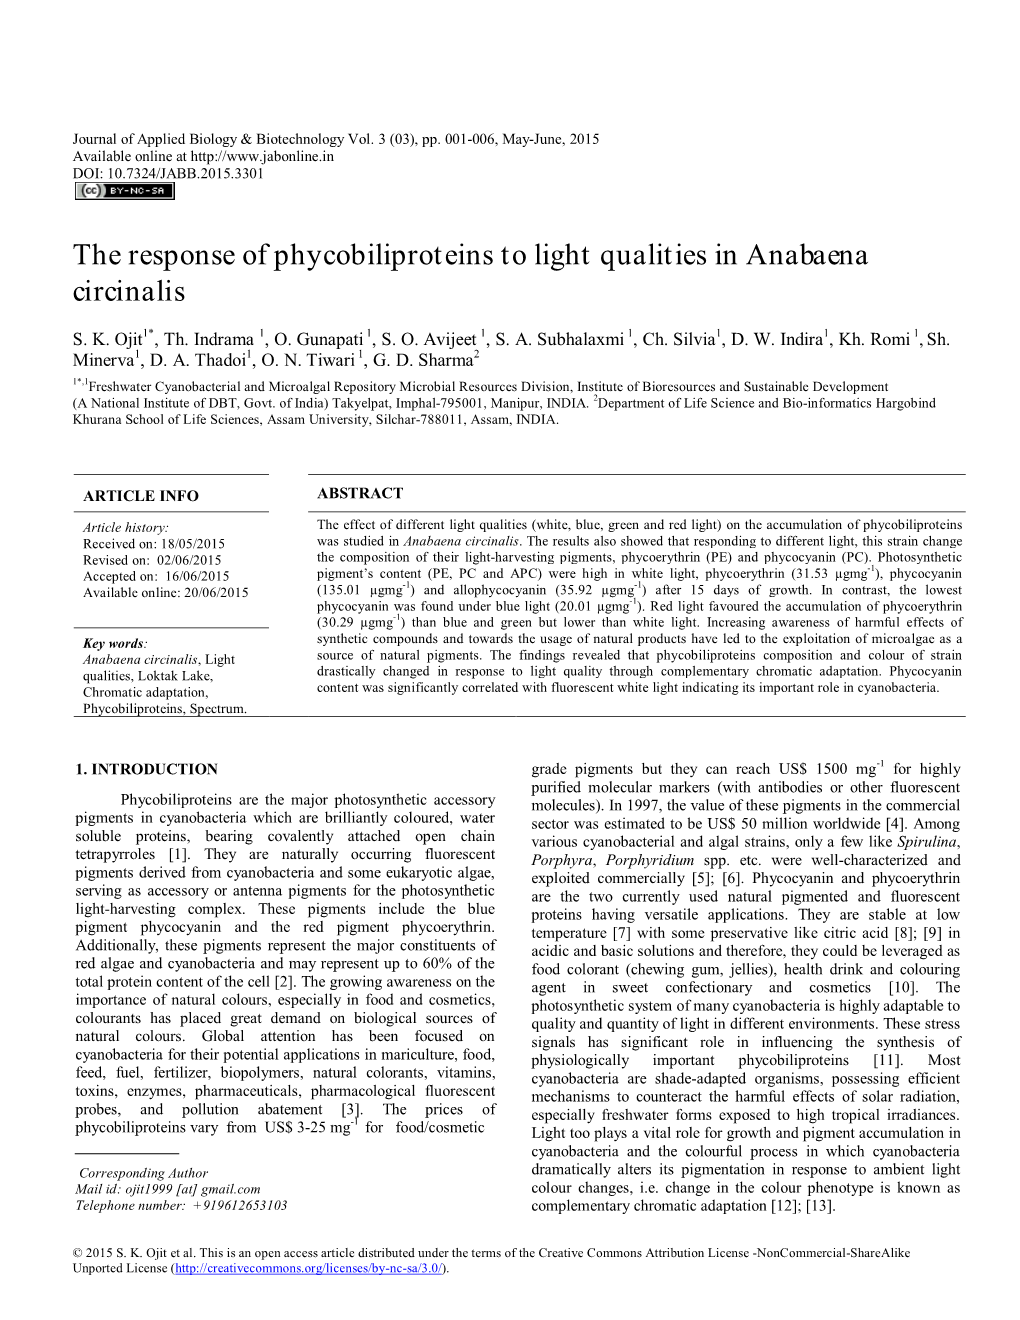 The Response of Phycobiliproteins to Light Qualities in Anabaena Circinalis